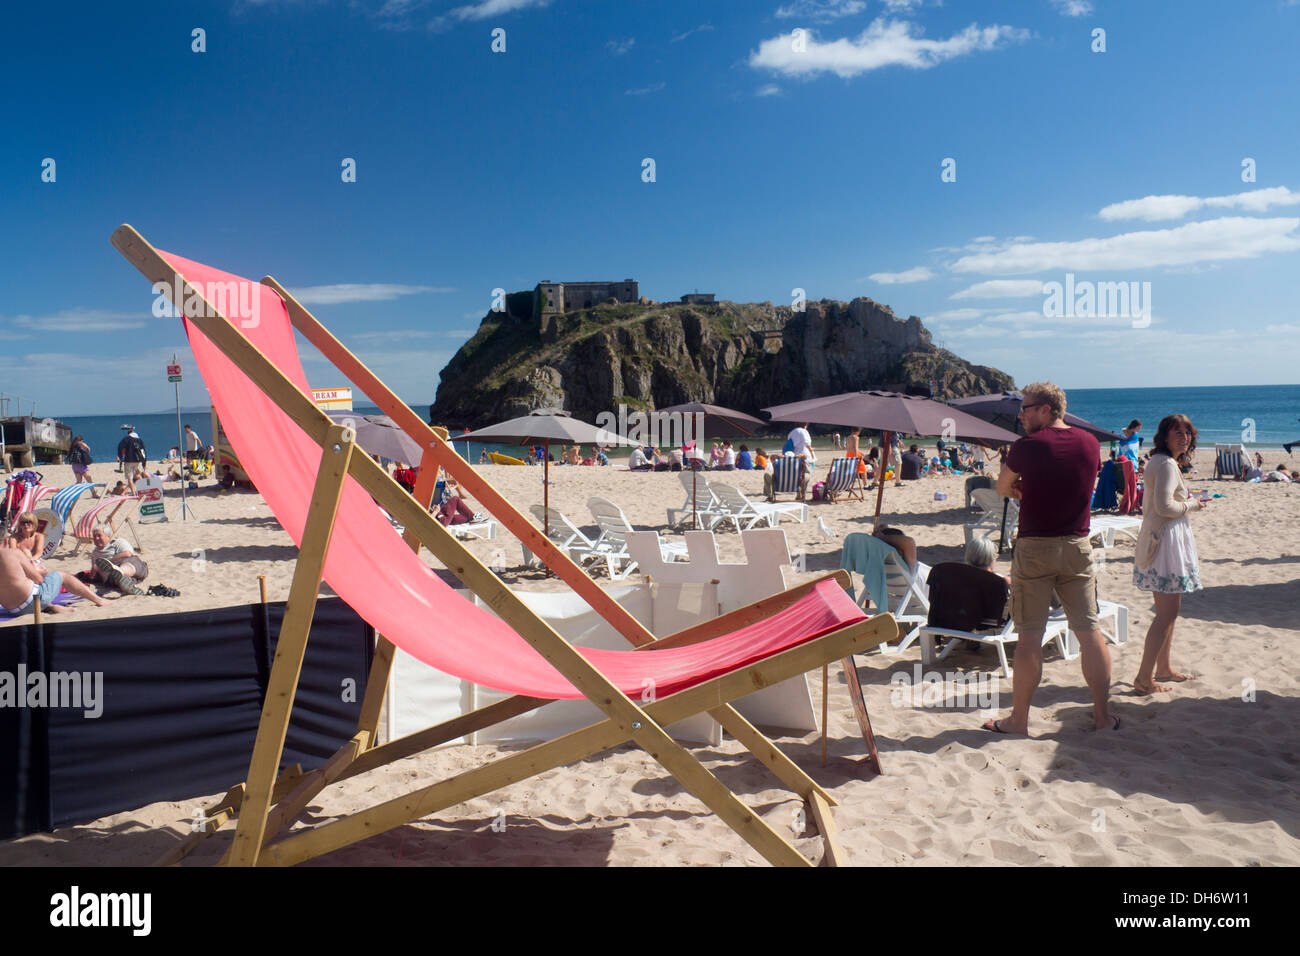 Giant deckchair on Castle Beach Tenby Pembrokeshire Wales UK People on beach in summer sunny day Stock Photo